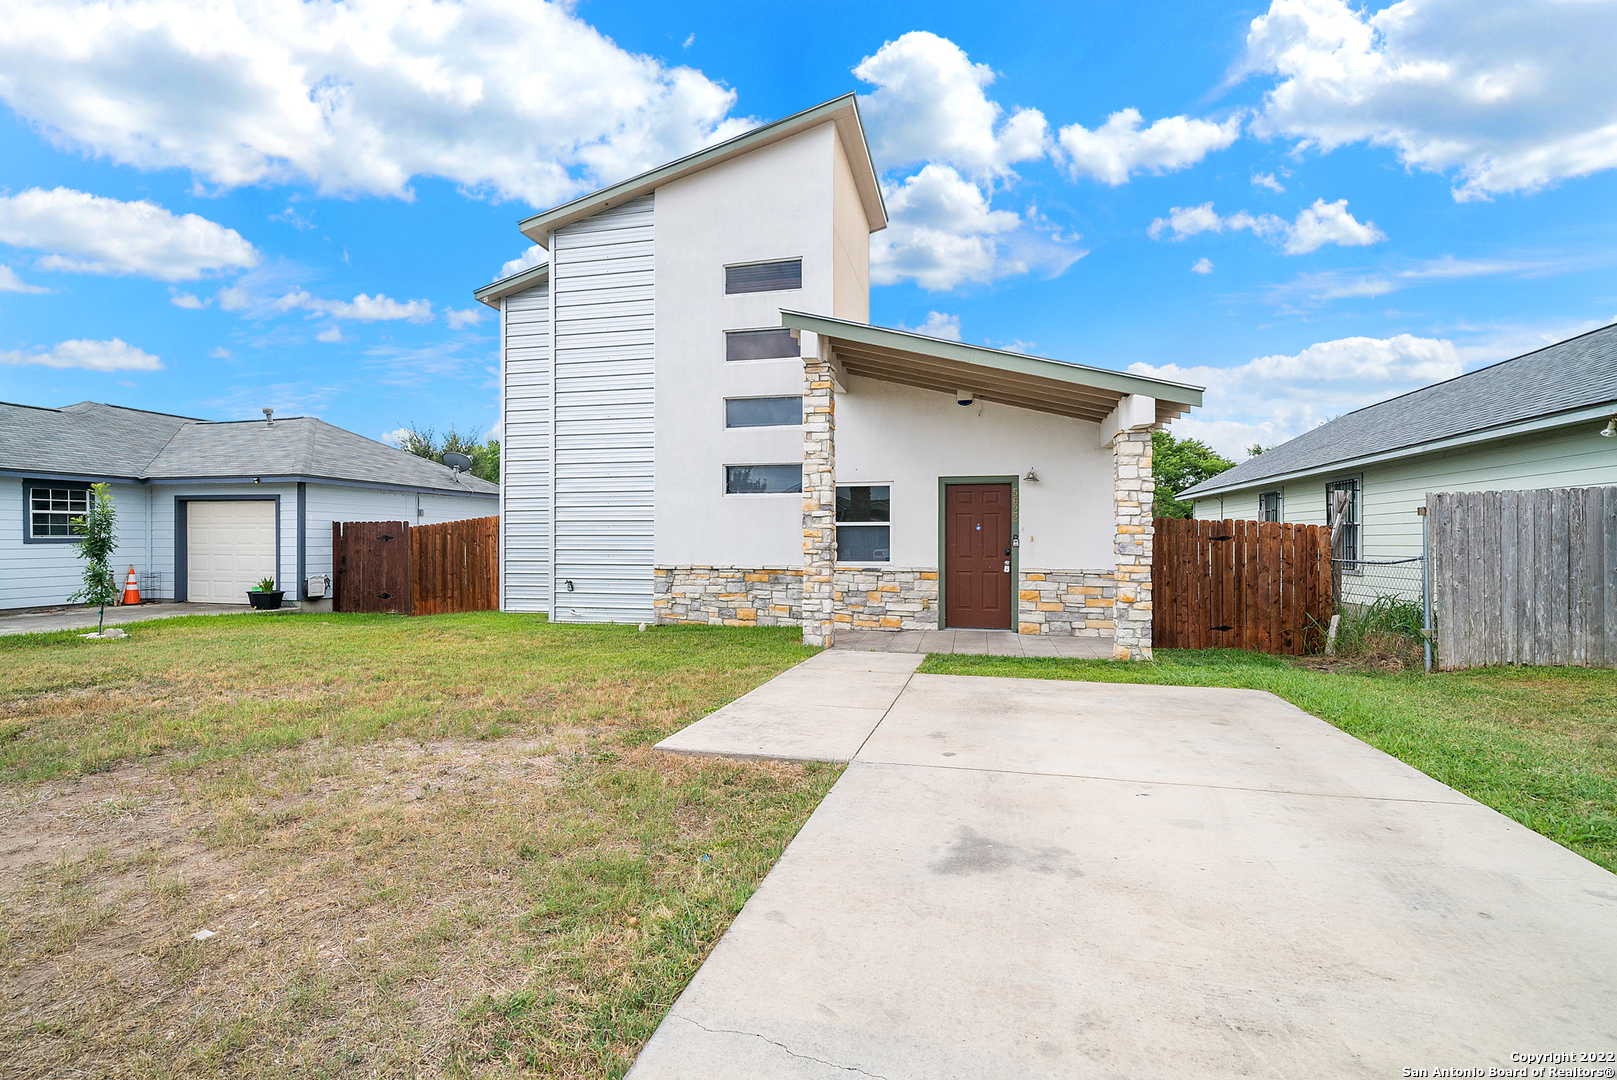 Cute Home within walking distance to Gilbert Garza Park.  Open floor plan with a downstairs master bedroom/bath.  Large fenced backyard.  When leaving, please lock using the lock feature on the touch pad.  Please do not lock from the handle inside.  See Offer Instructions in documents.